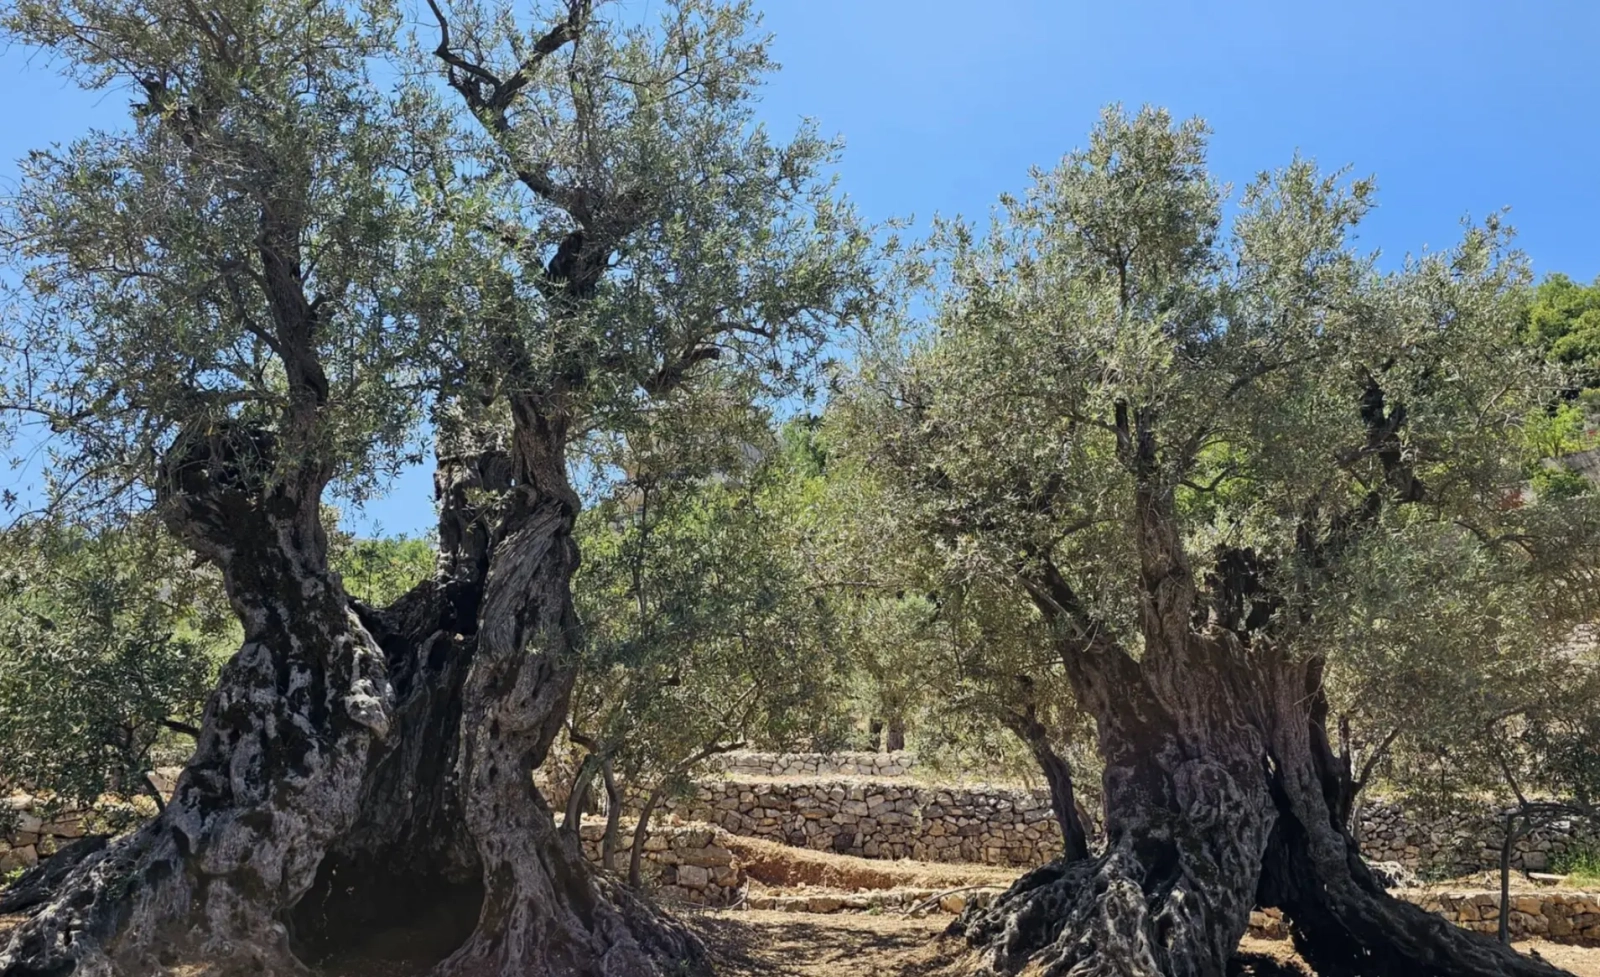 The Millennial Olive Trees Tour